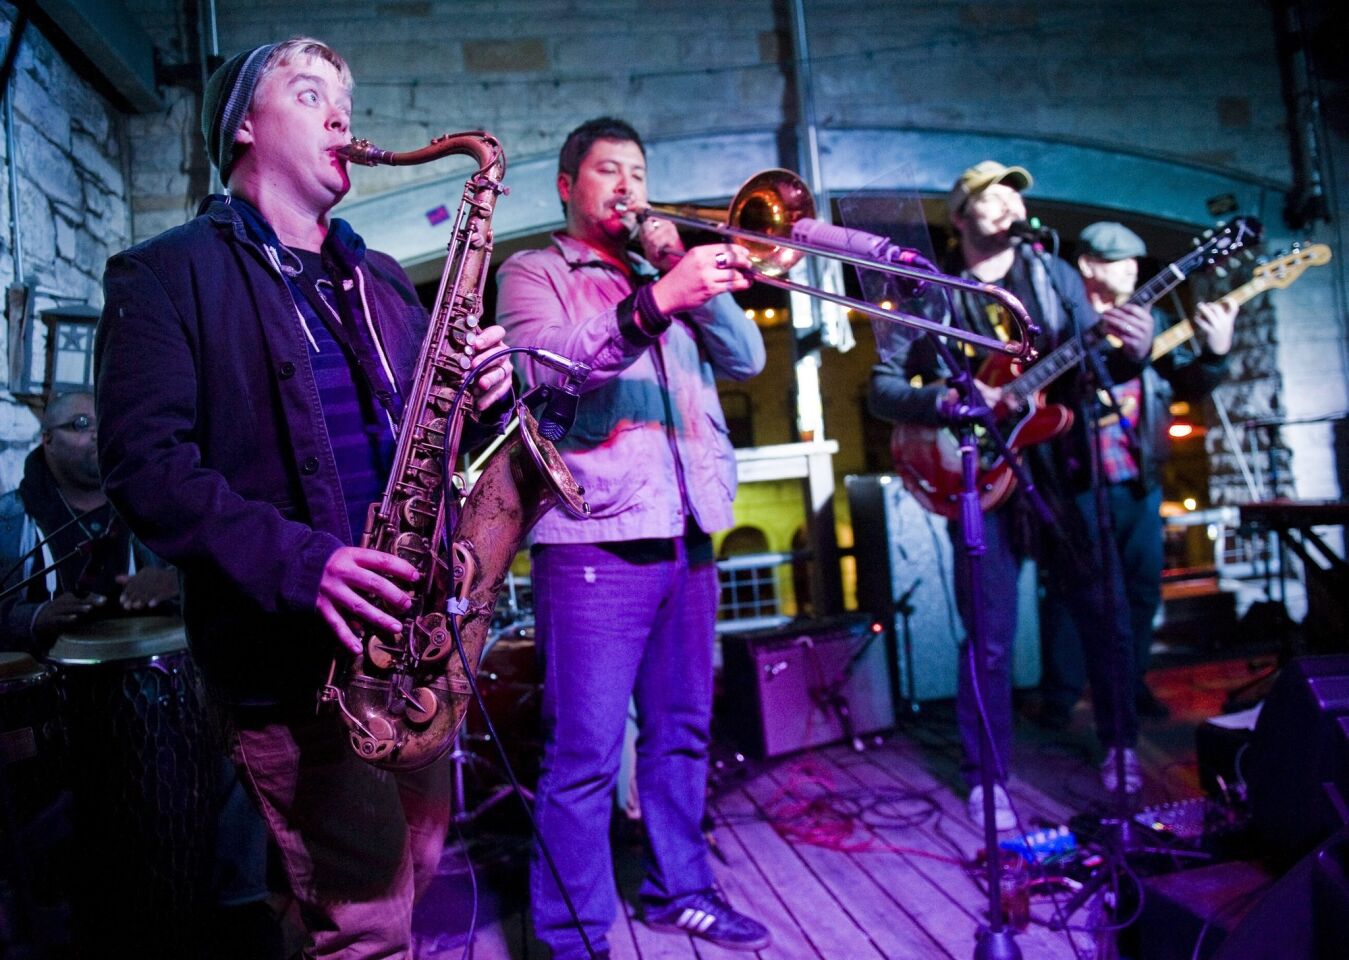 Members of the band Mingo Fishtrap of Austin, Texas, perform at 512 Rooftop.